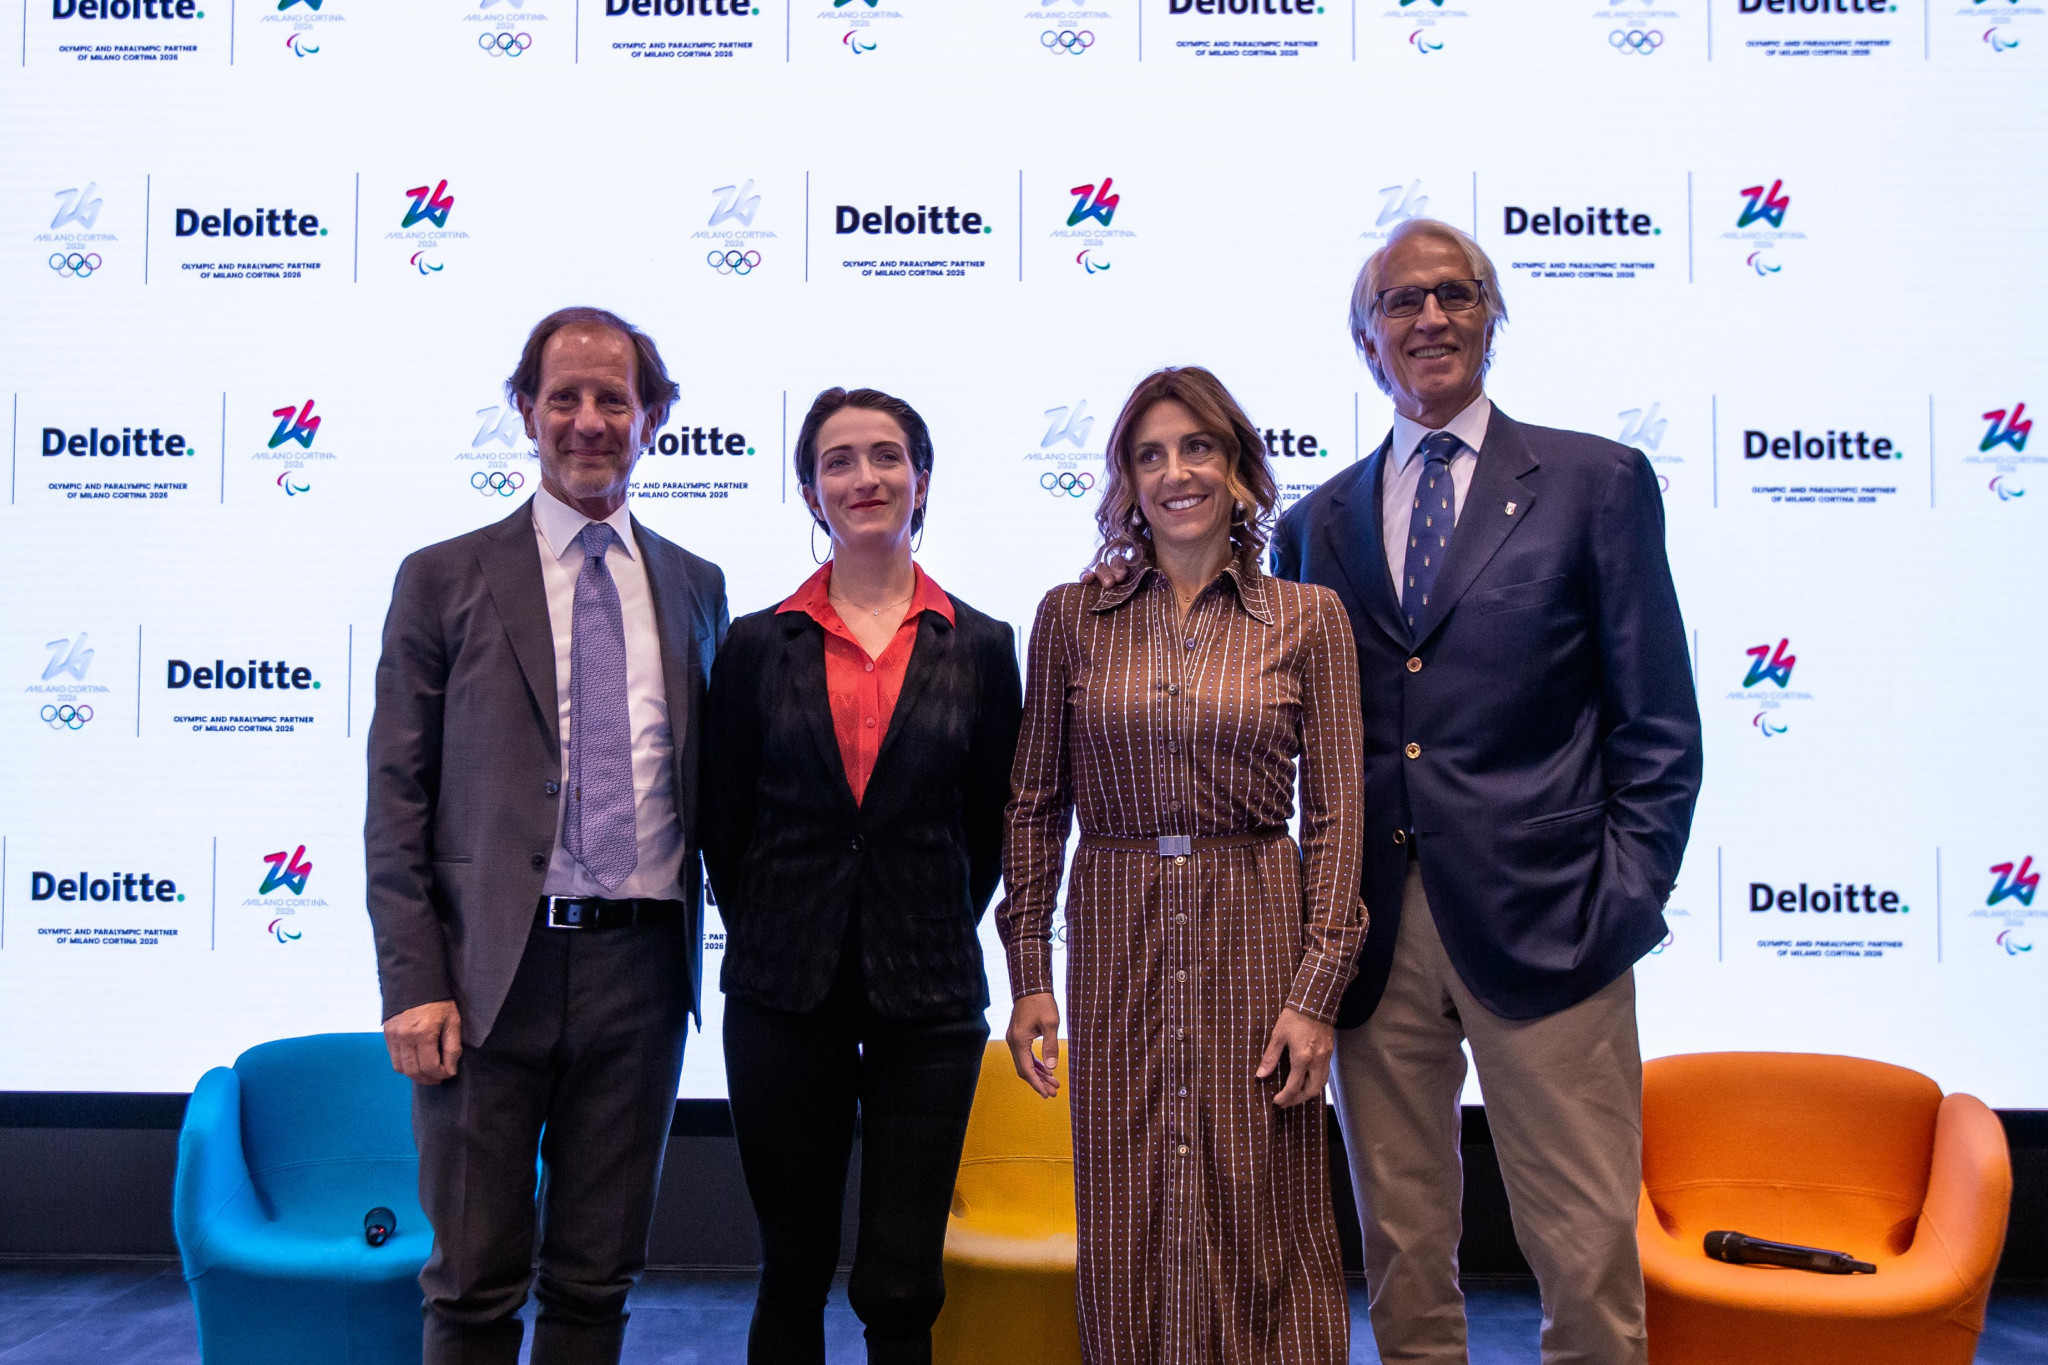 Milan Cortina 2026 organisers sign deal with Deloitte Italia